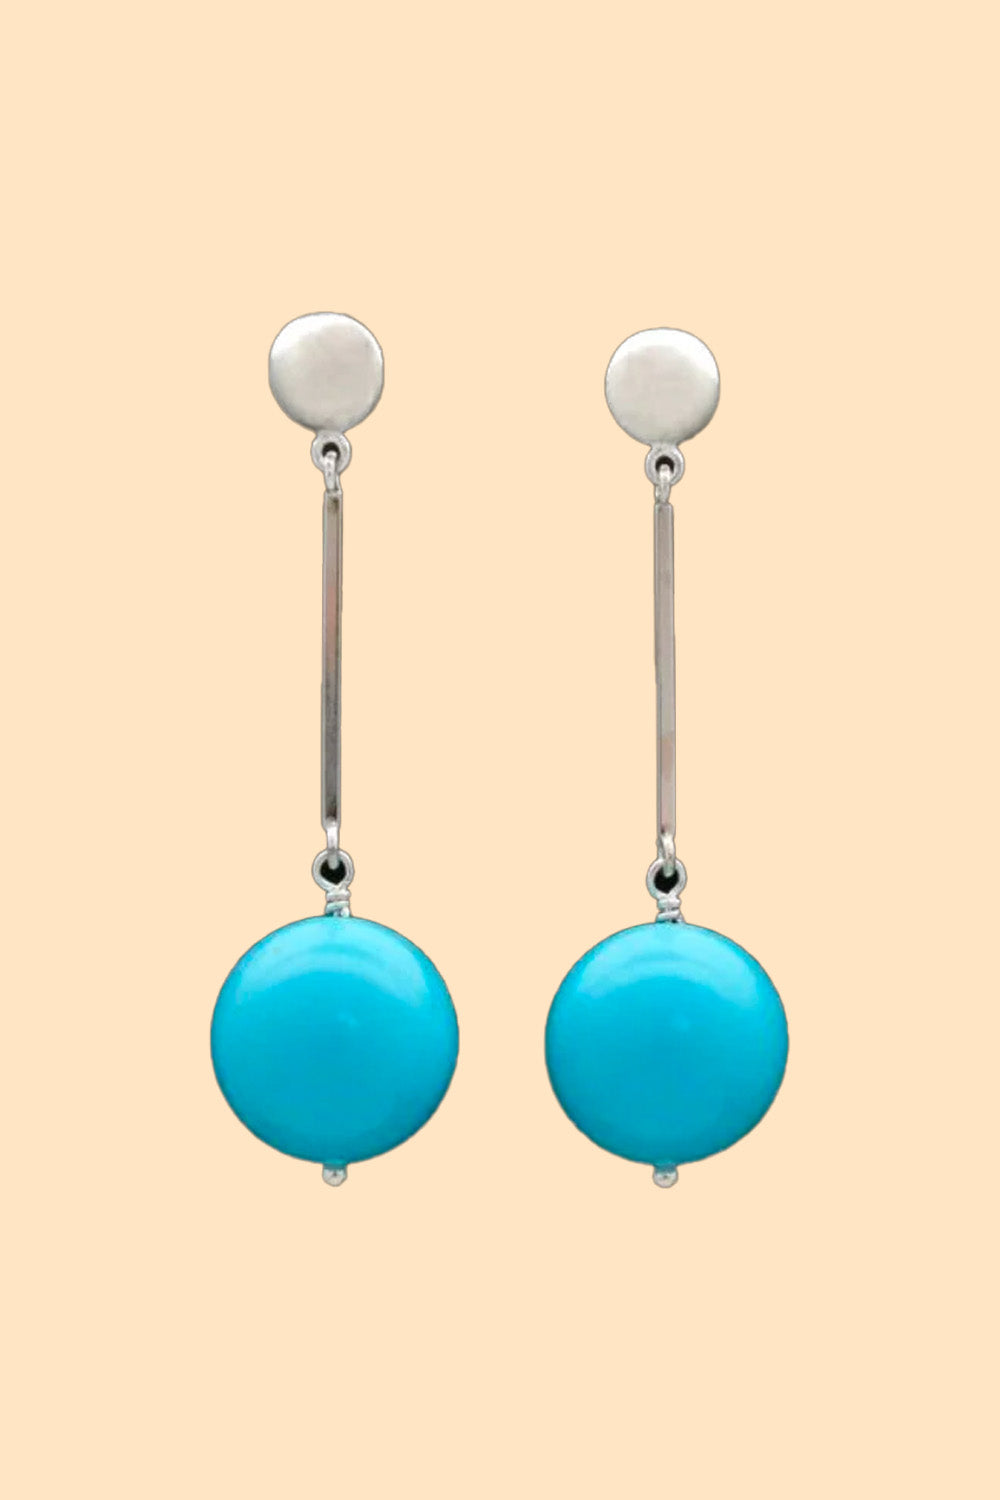 Airy Heights Design - Bar Earrings with Turquoise Gumballs